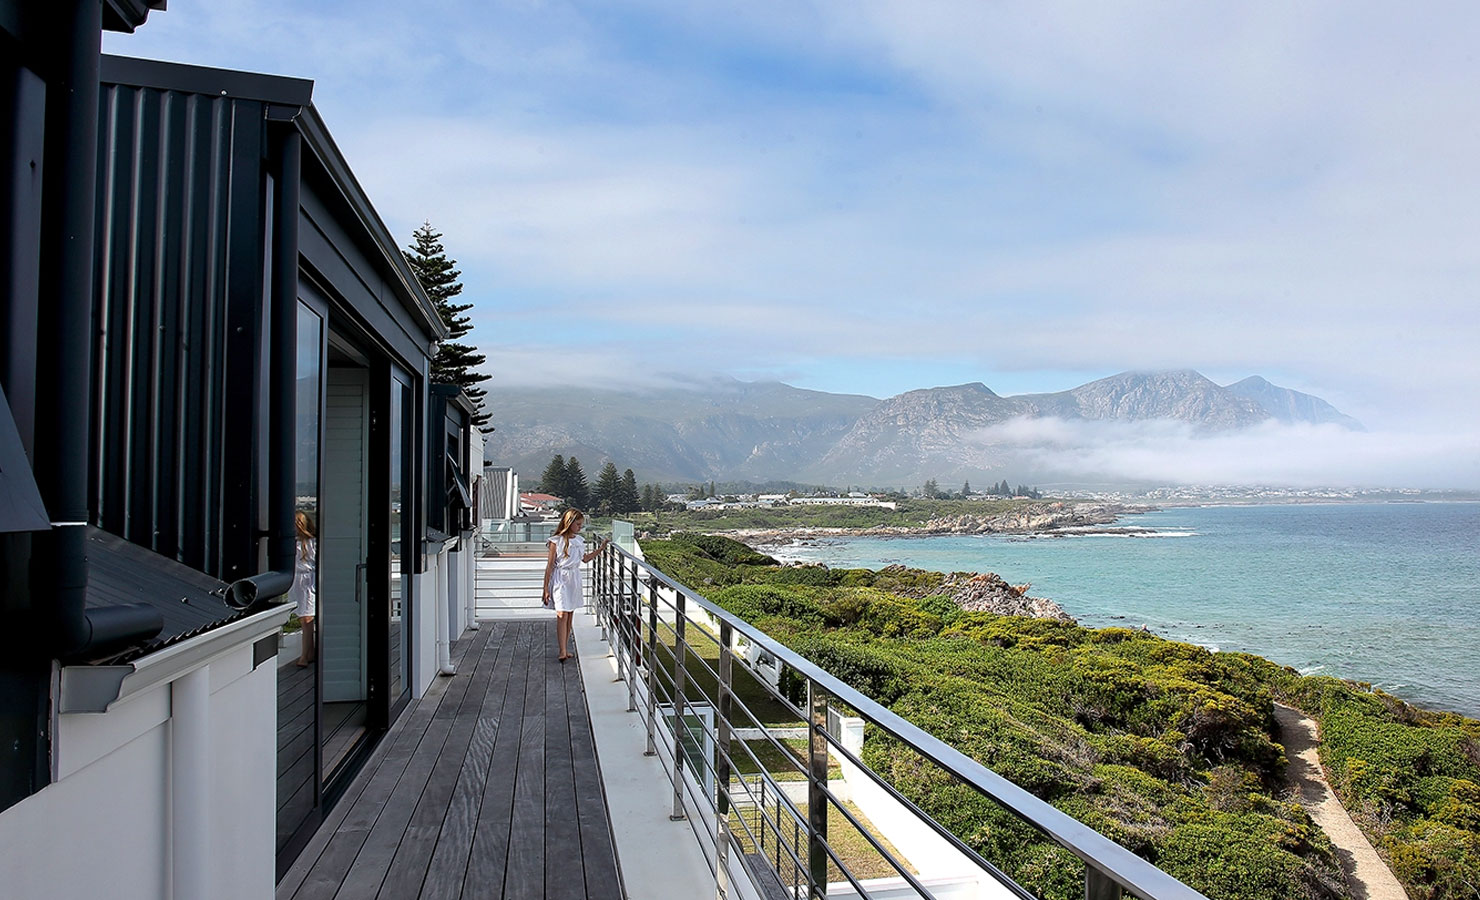 The upper balcony of The Blue Anchor has a beautiful view out over the cliffside path with its rocky coves and tidal pools, extending all along the Hermanus coast with its dramatic Overberg mountains and pristine beaches lining Walker Bay.